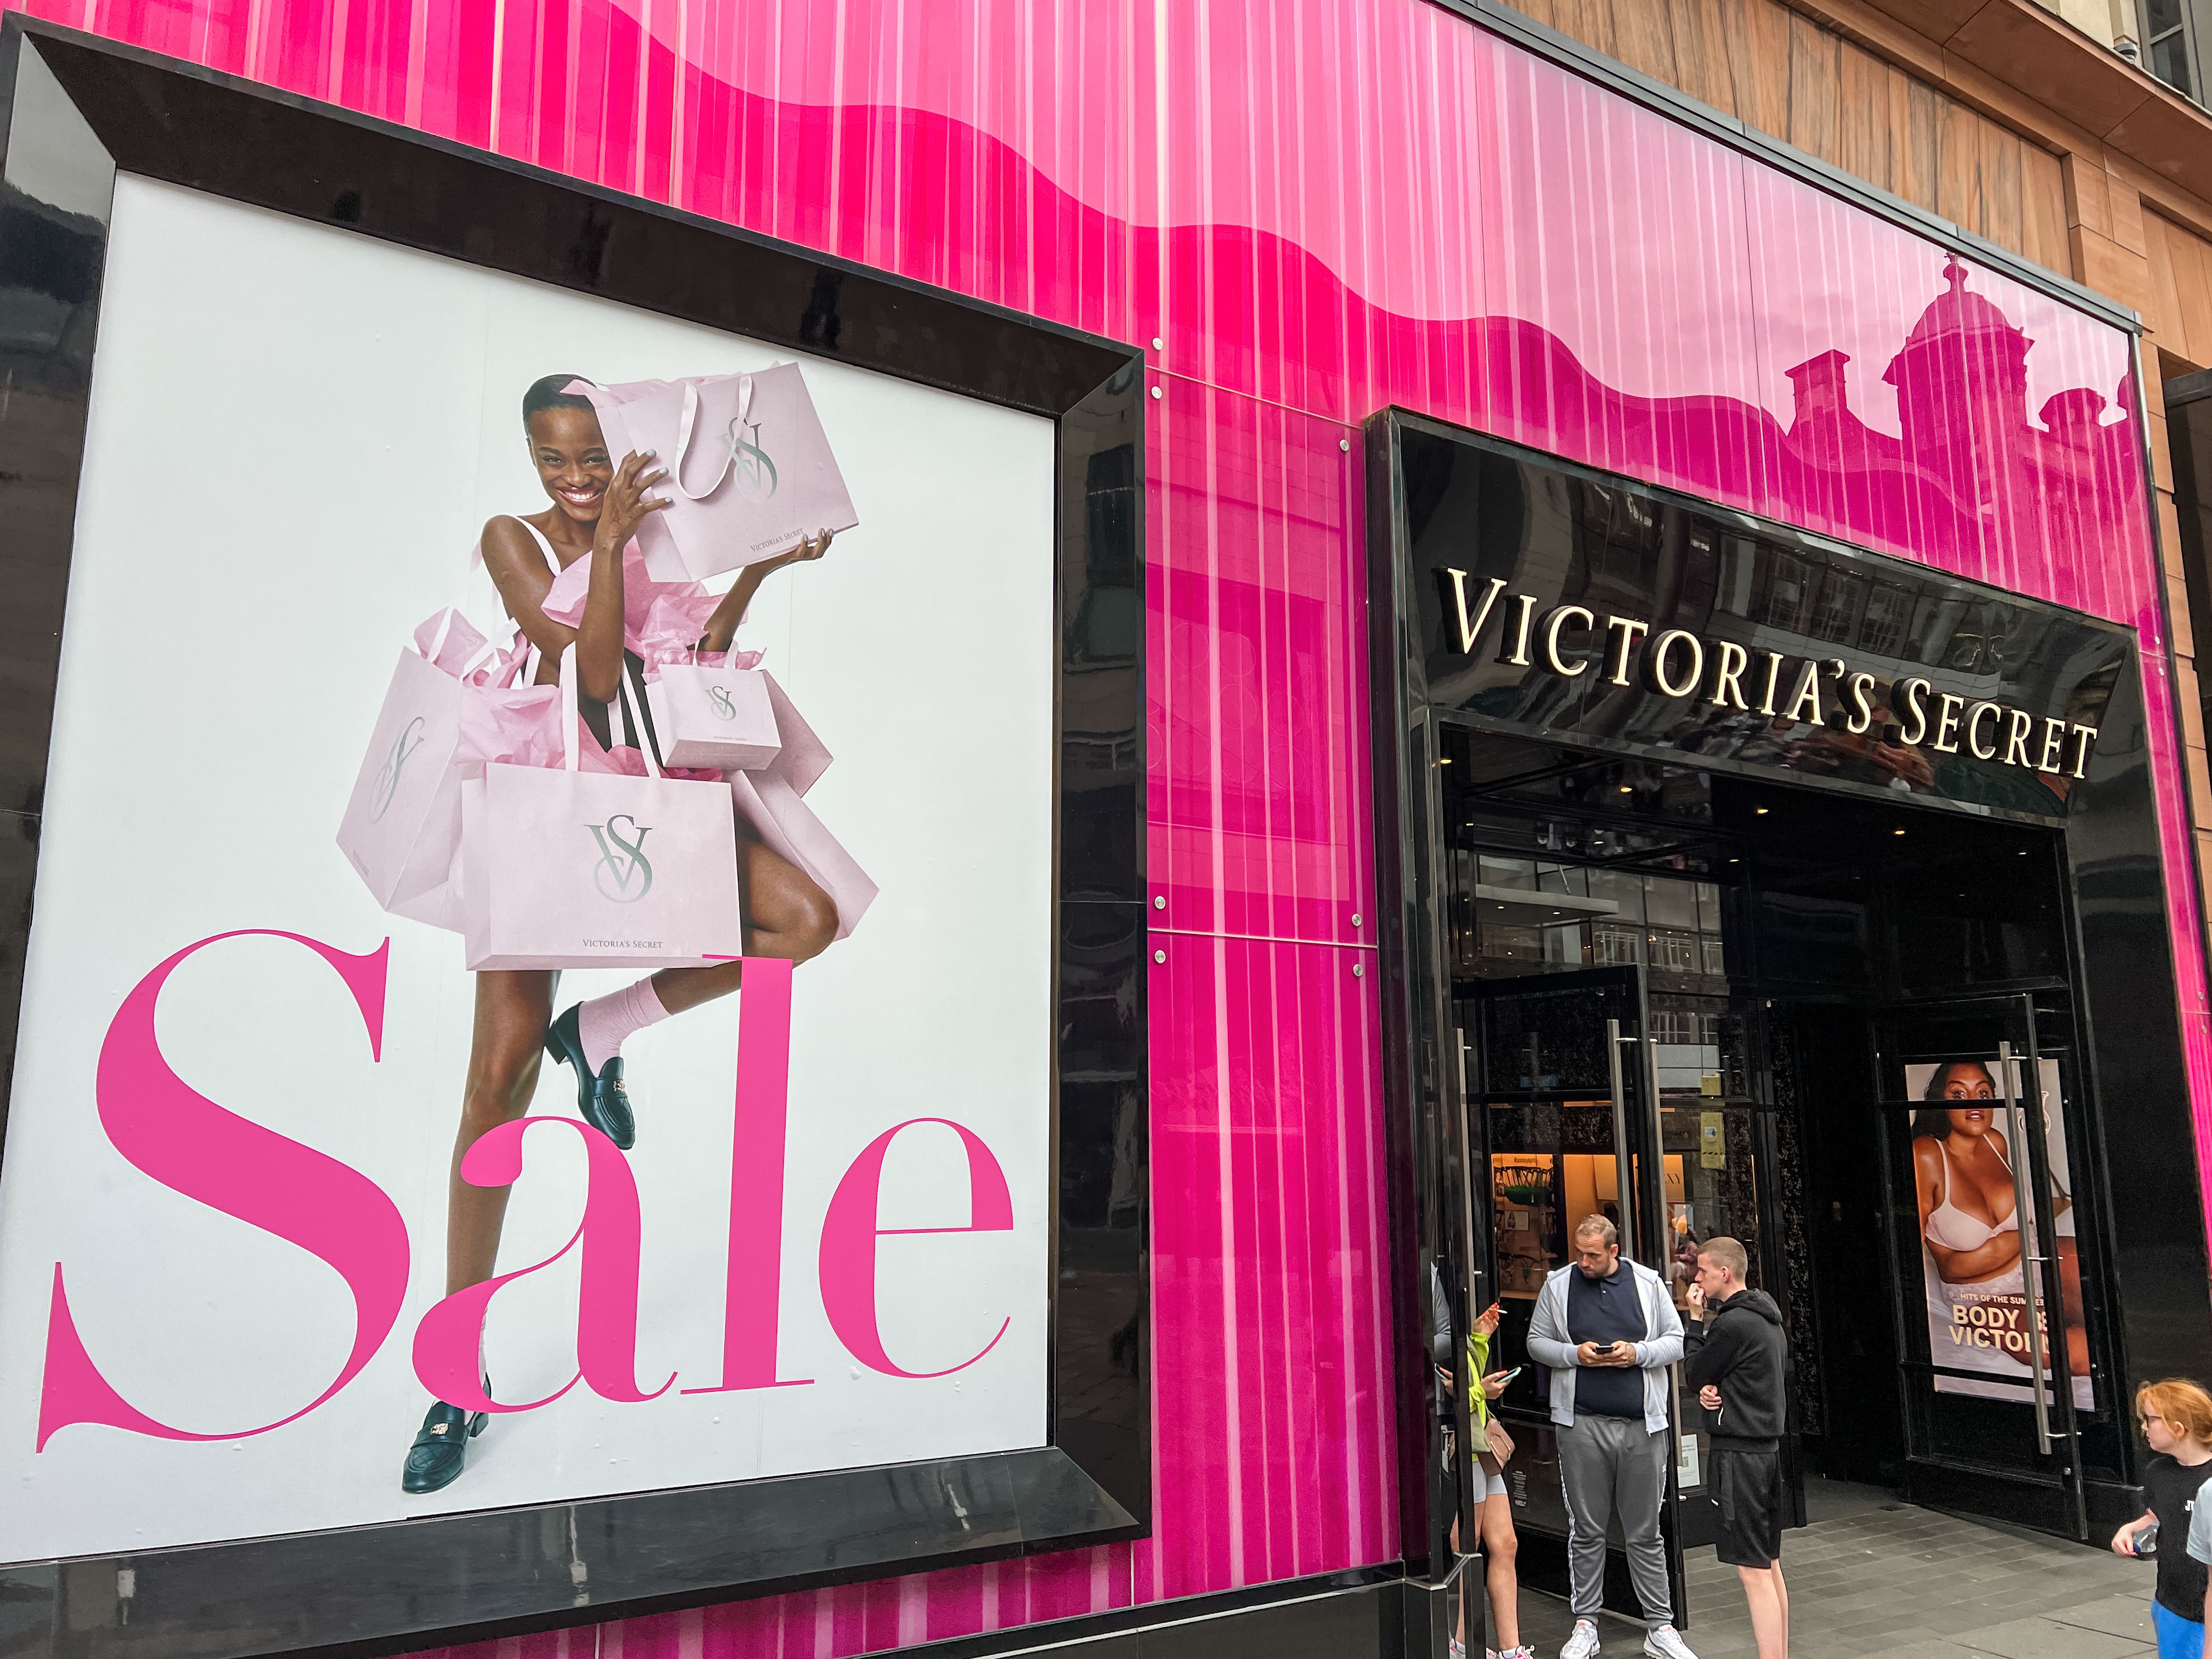 Victoria's Secret is back — with an inclusive new vision, show and